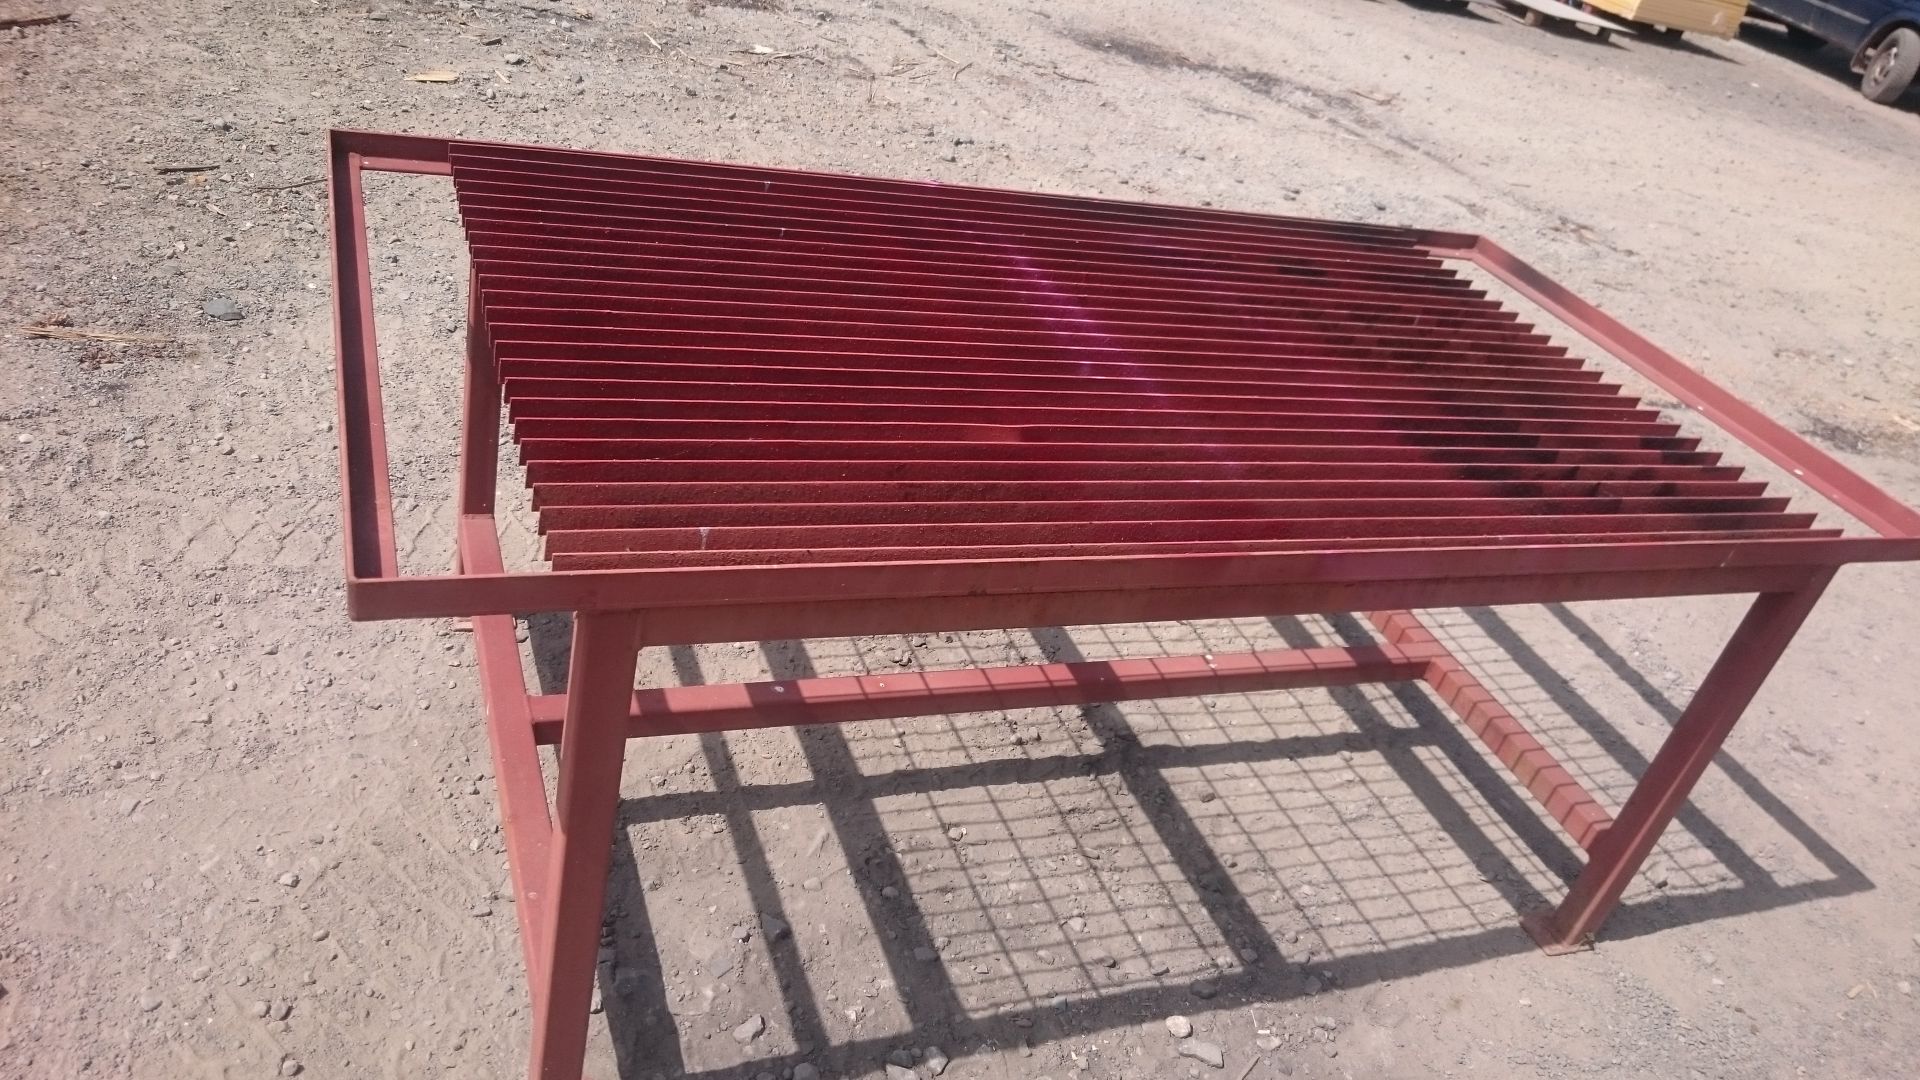 Painting table, 2030mm x 1030mm x 790mm high